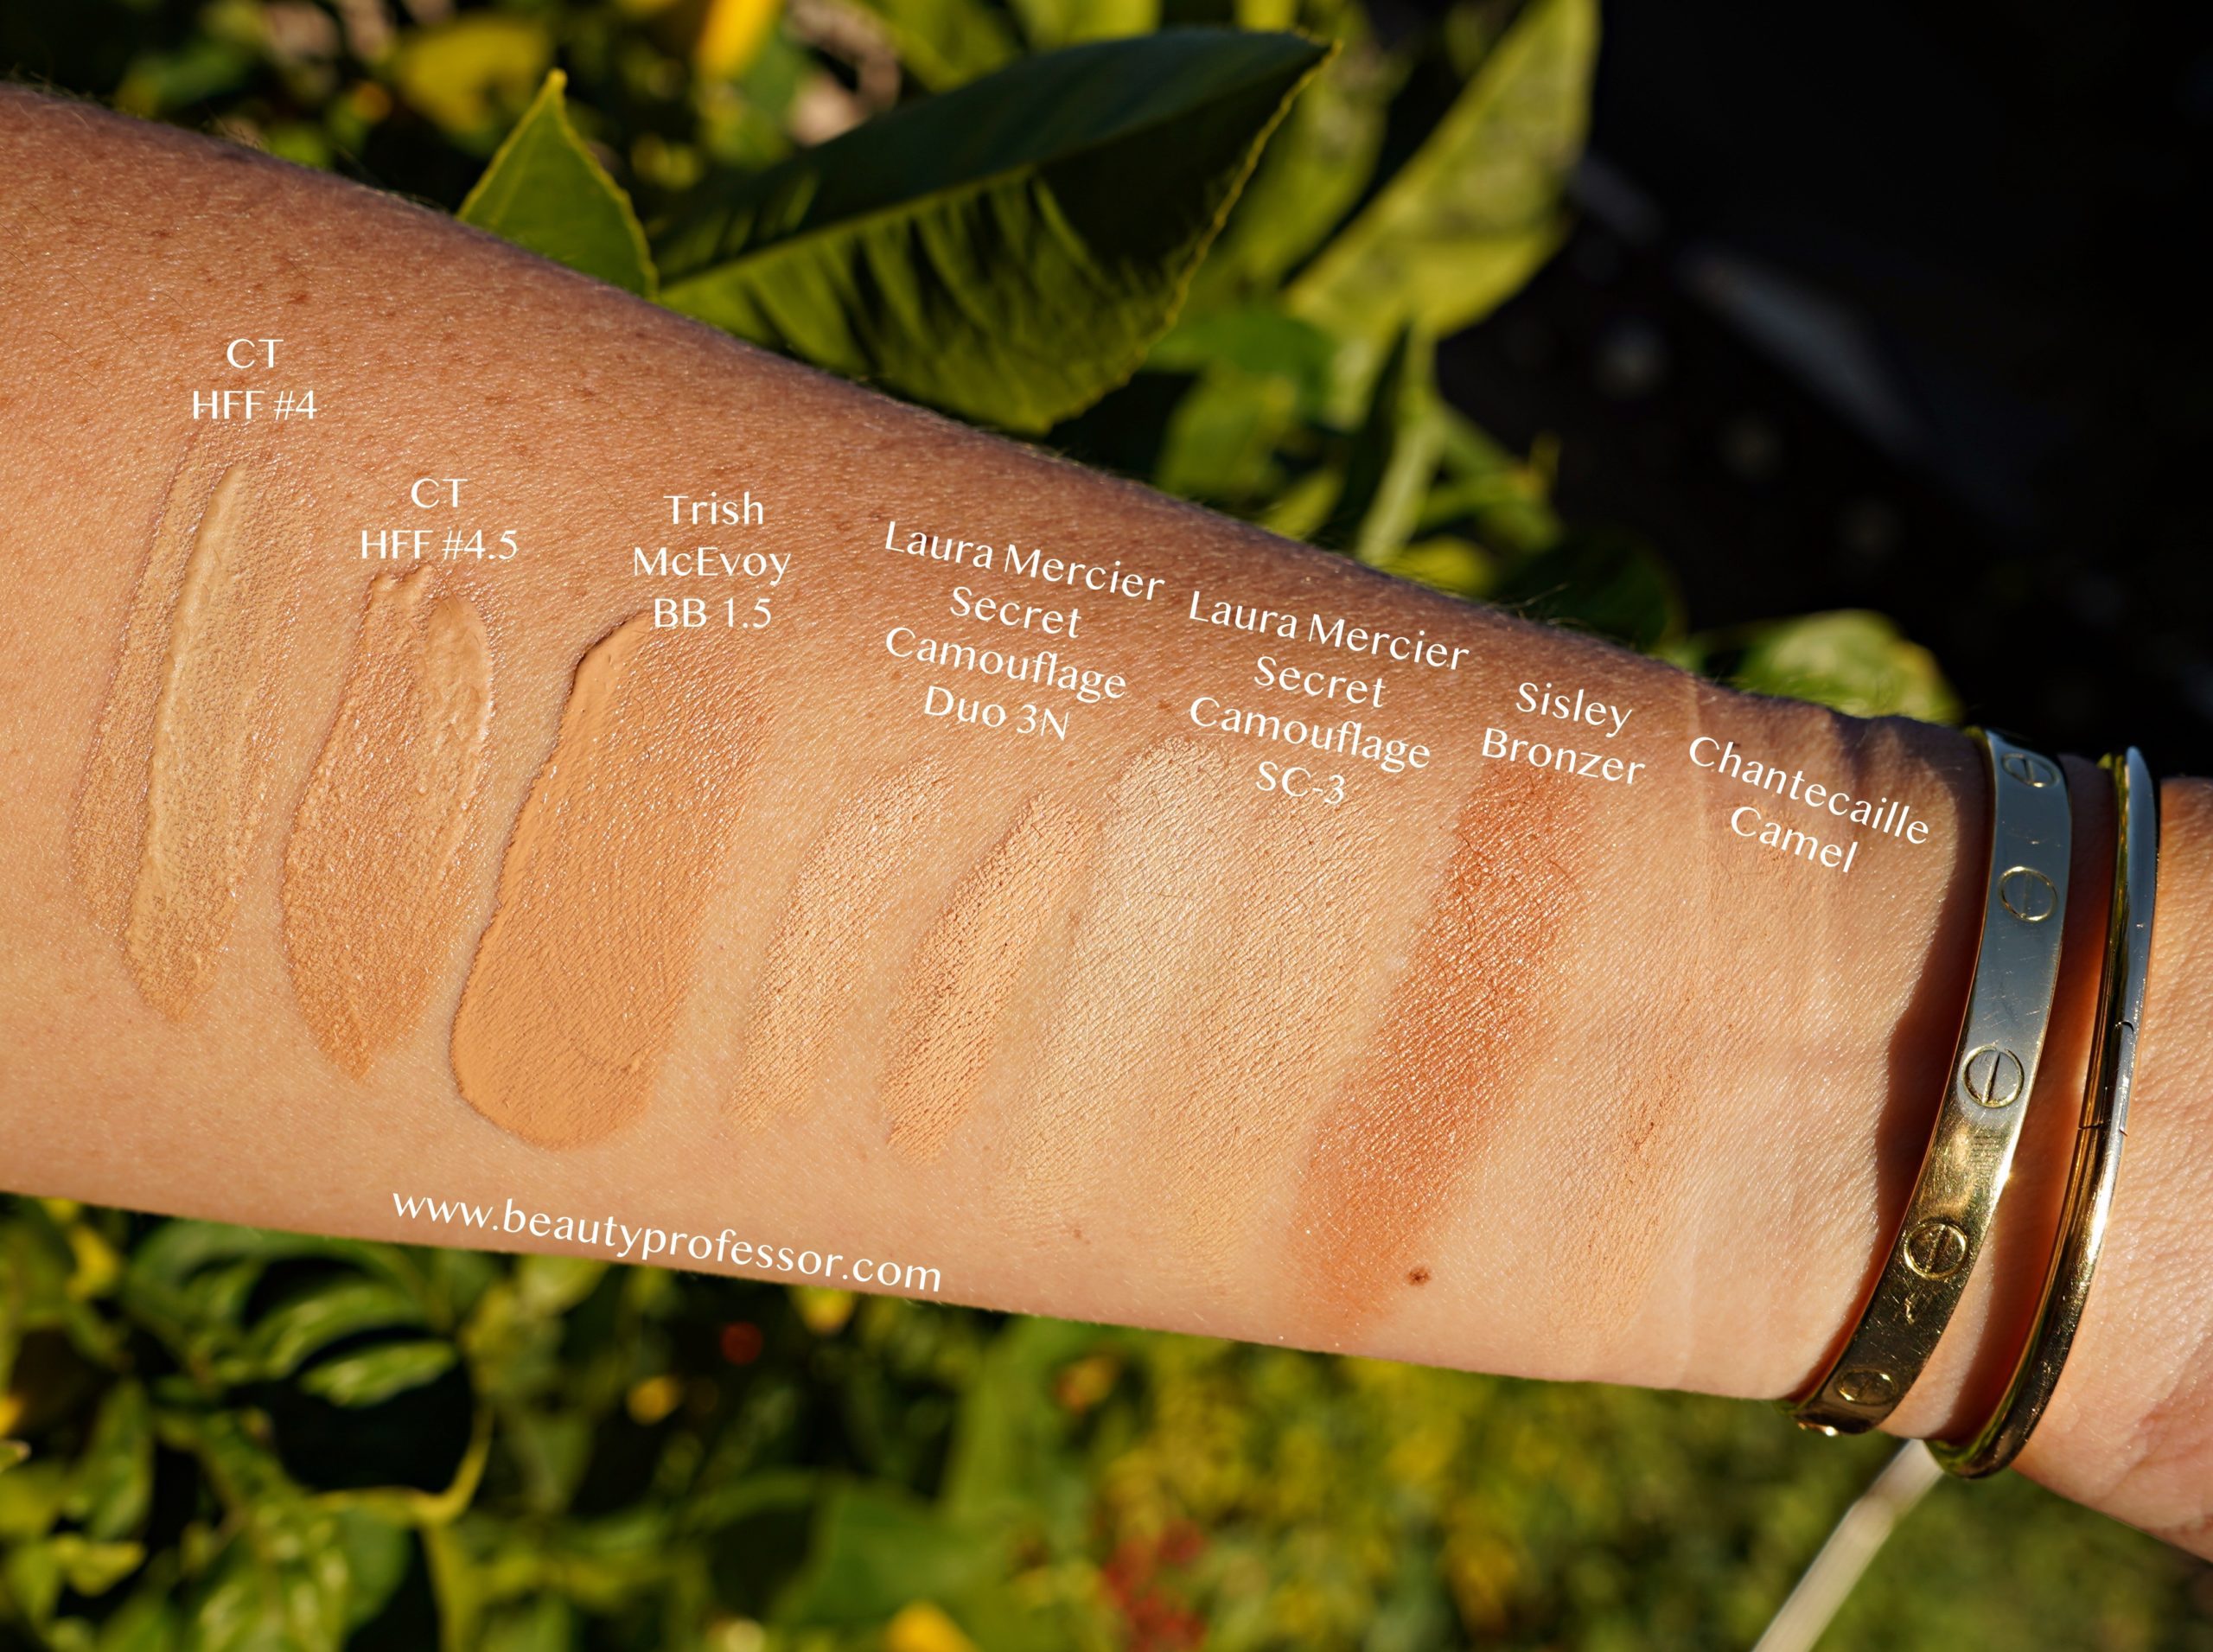 Face and base swatches in direct sunlight